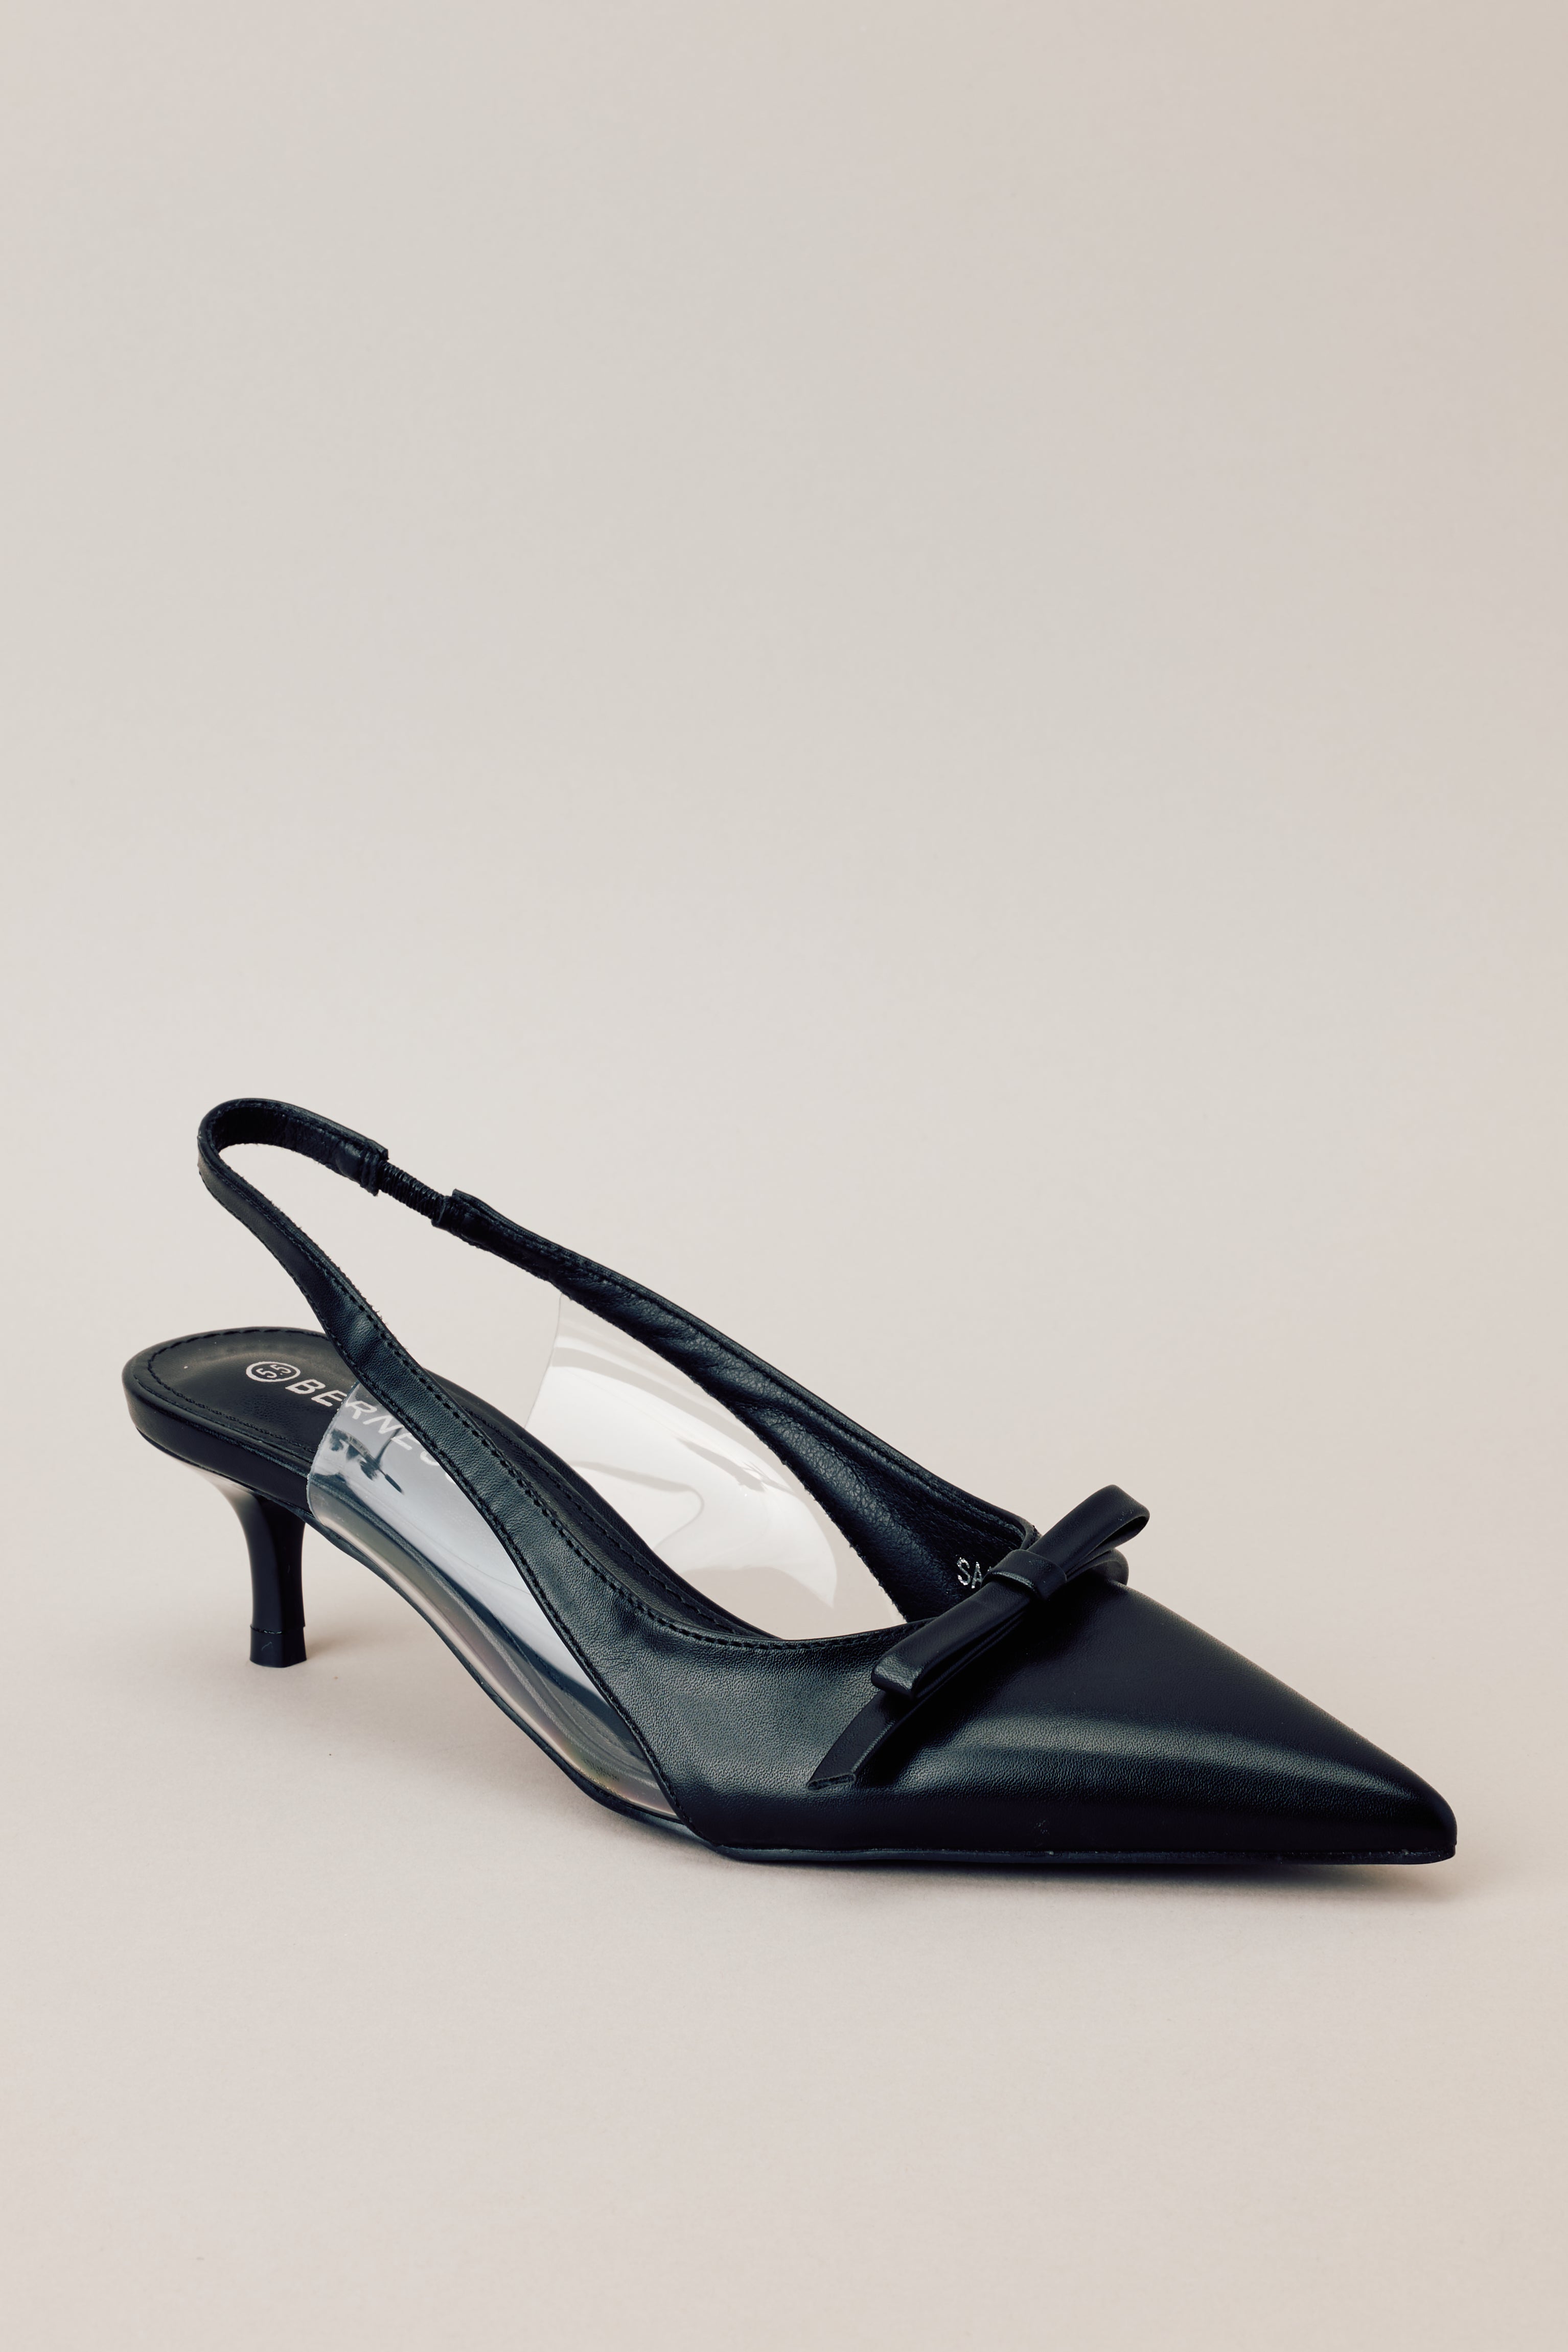 Front angled view of black kitten heels featuring a pointed closed toe, delicate bow detailing, a strap around the back of the foot, clear siding for extra support, and an extremely short heel